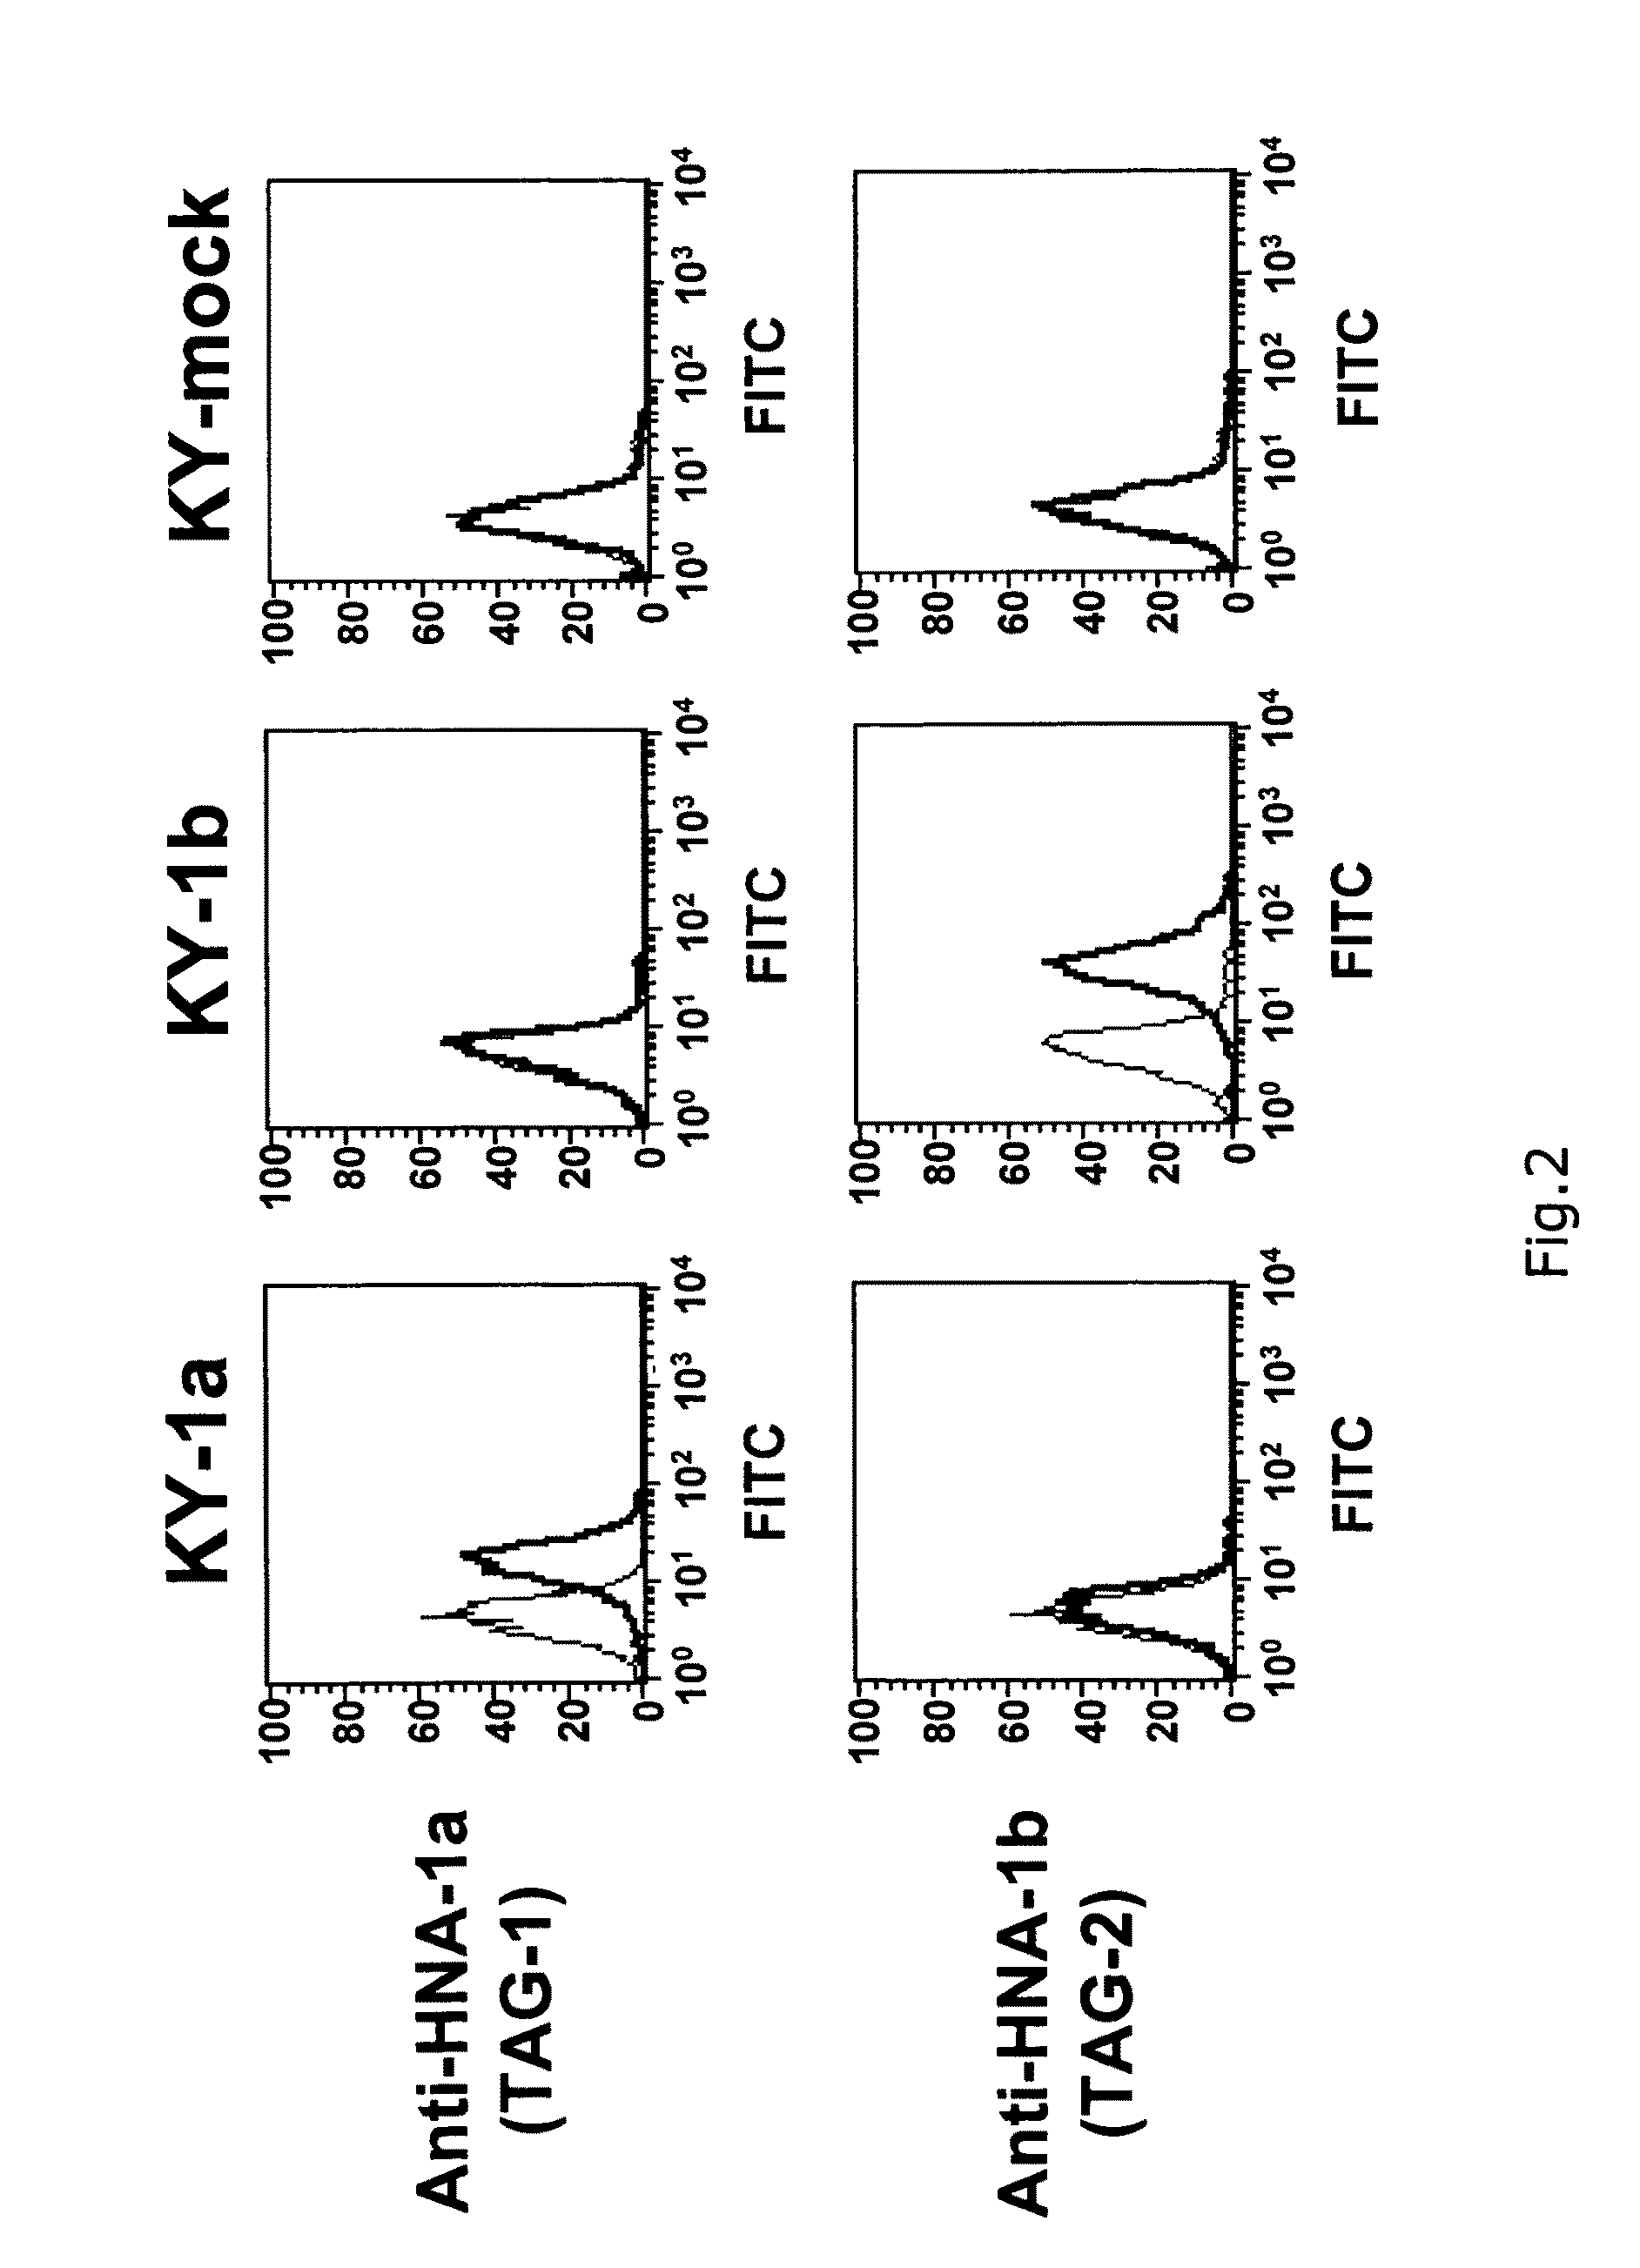 Panel cell used for granulocyte antibody detection